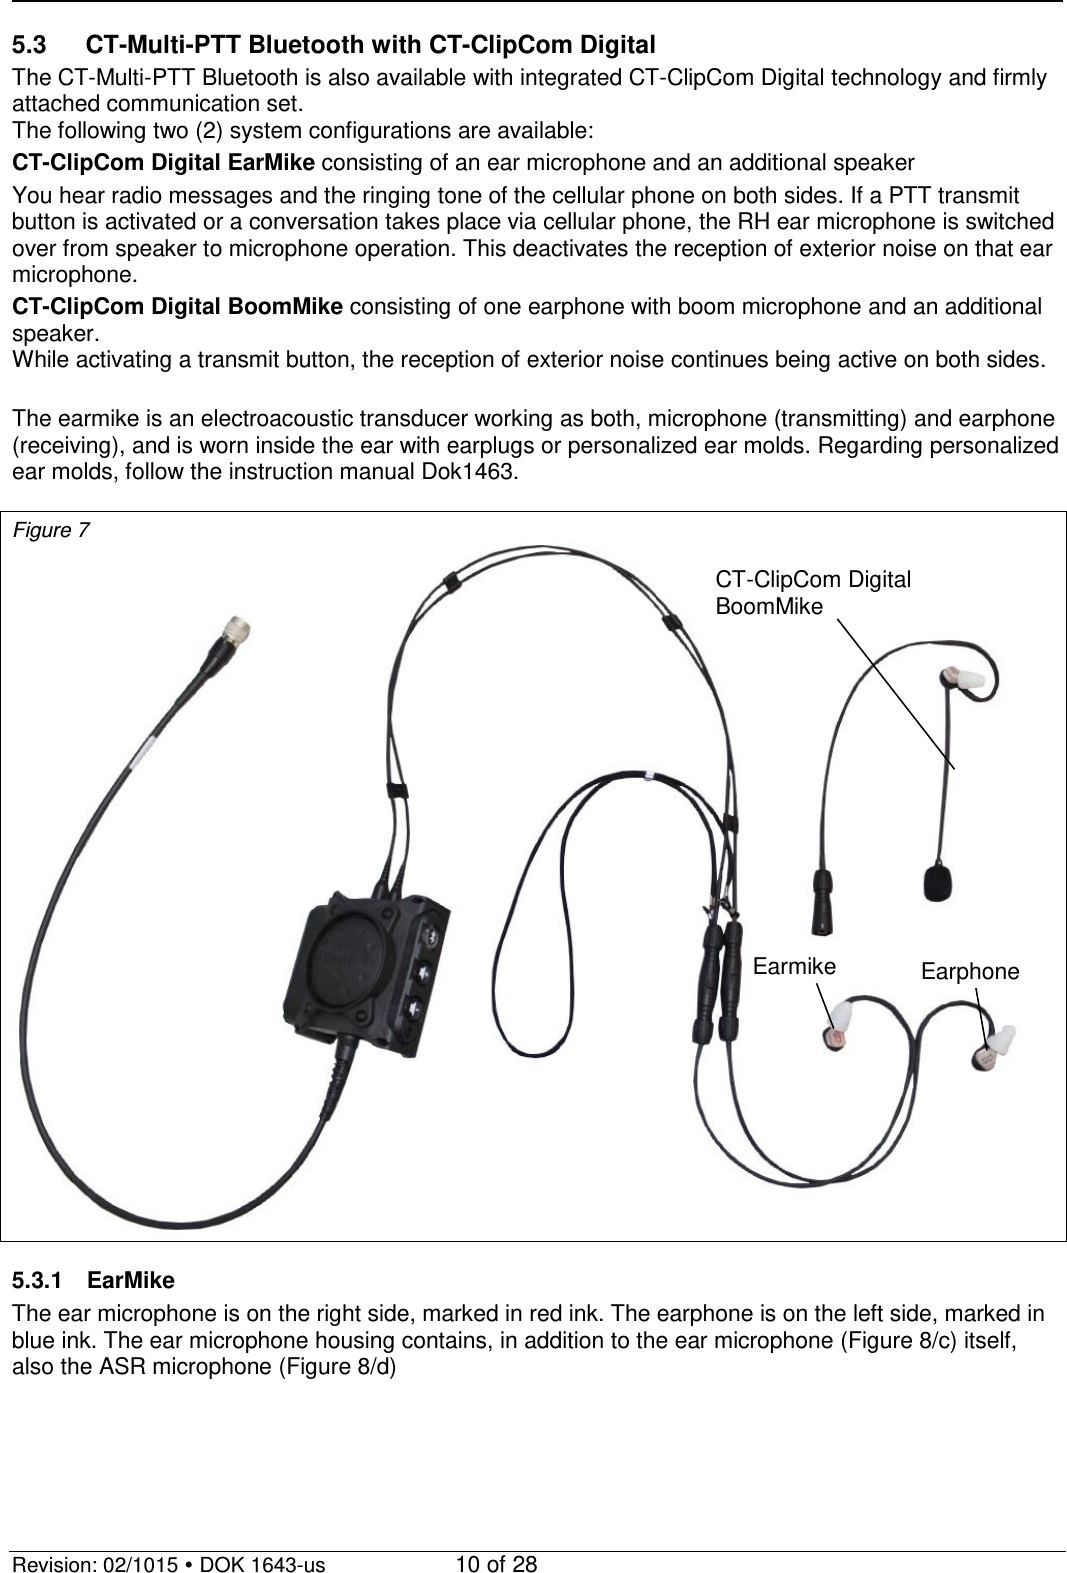   Revision: 02/1015  DOK 1643-us    10 of 28 5.3 CT-Multi-PTT Bluetooth with CT-ClipCom Digital The CT-Multi-PTT Bluetooth is also available with integrated CT-ClipCom Digital technology and firmly attached communication set. The following two (2) system configurations are available: CT-ClipCom Digital EarMike consisting of an ear microphone and an additional speaker You hear radio messages and the ringing tone of the cellular phone on both sides. If a PTT transmit button is activated or a conversation takes place via cellular phone, the RH ear microphone is switched over from speaker to microphone operation. This deactivates the reception of exterior noise on that ear microphone. CT-ClipCom Digital BoomMike consisting of one earphone with boom microphone and an additional speaker.  While activating a transmit button, the reception of exterior noise continues being active on both sides.  The earmike is an electroacoustic transducer working as both, microphone (transmitting) and earphone (receiving), and is worn inside the ear with earplugs or personalized ear molds. Regarding personalized ear molds, follow the instruction manual Dok1463.  Figure 7   5.3.1  EarMike The ear microphone is on the right side, marked in red ink. The earphone is on the left side, marked in blue ink. The ear microphone housing contains, in addition to the ear microphone (Figure 8/c) itself, also the ASR microphone (Figure 8/d) CT-ClipCom Digital  BoomMike Earmike Earphone 